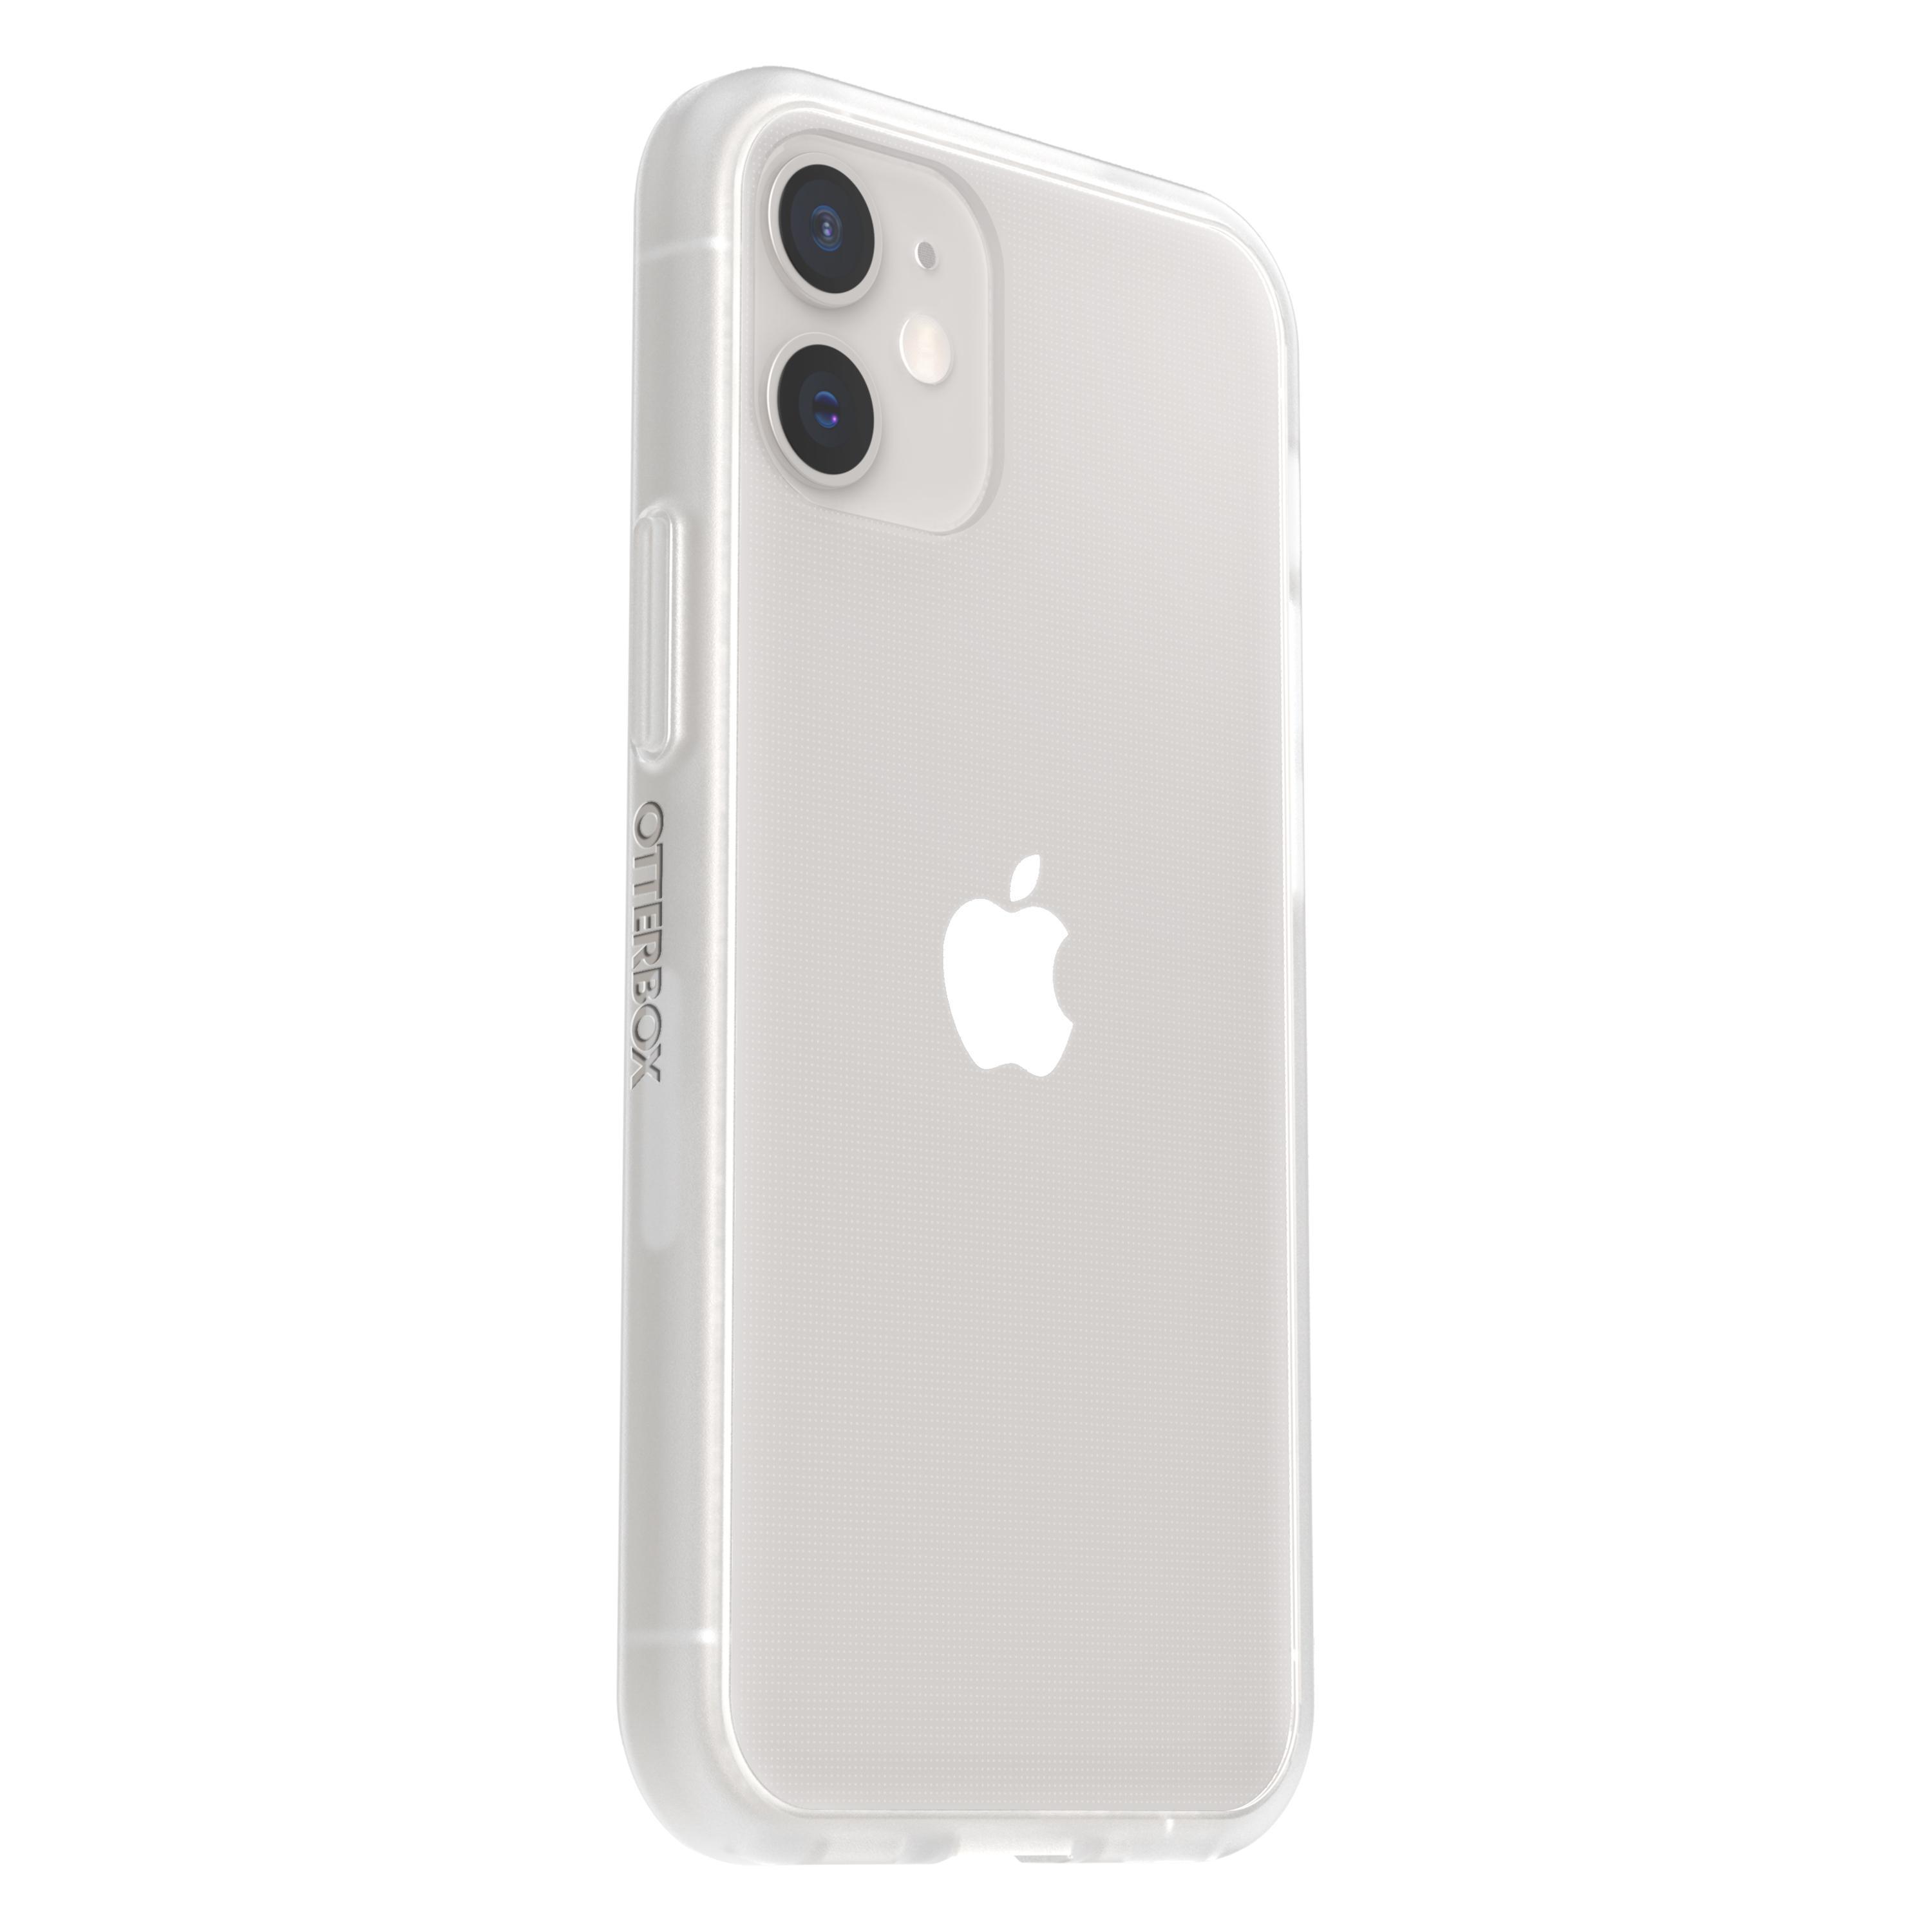 Backcover, Apple, React Trusted , iPhone Glass Transparent 12 + Mini, OTTERBOX